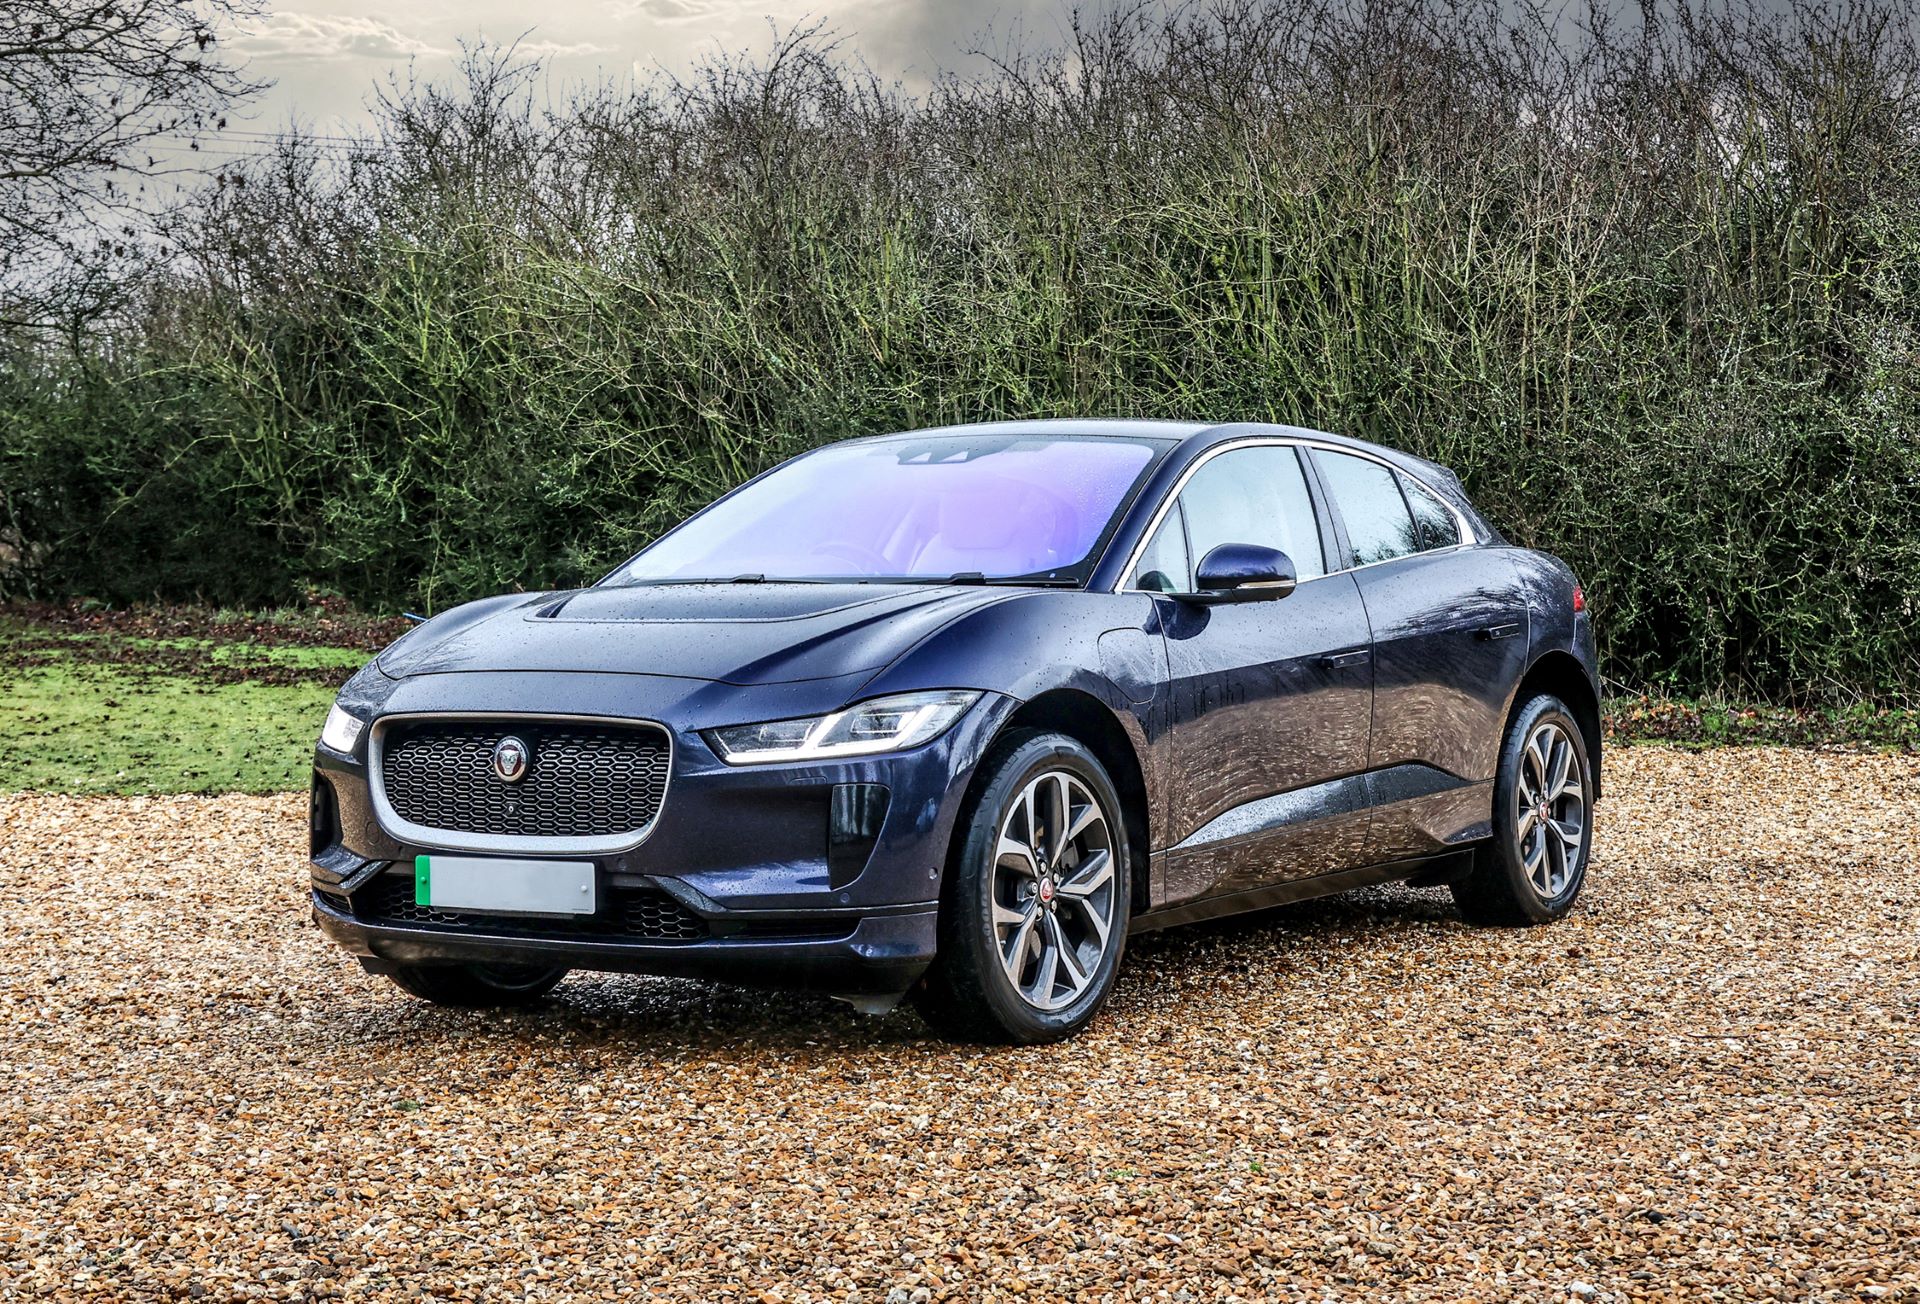 The King’s electric Jaguar could be yours